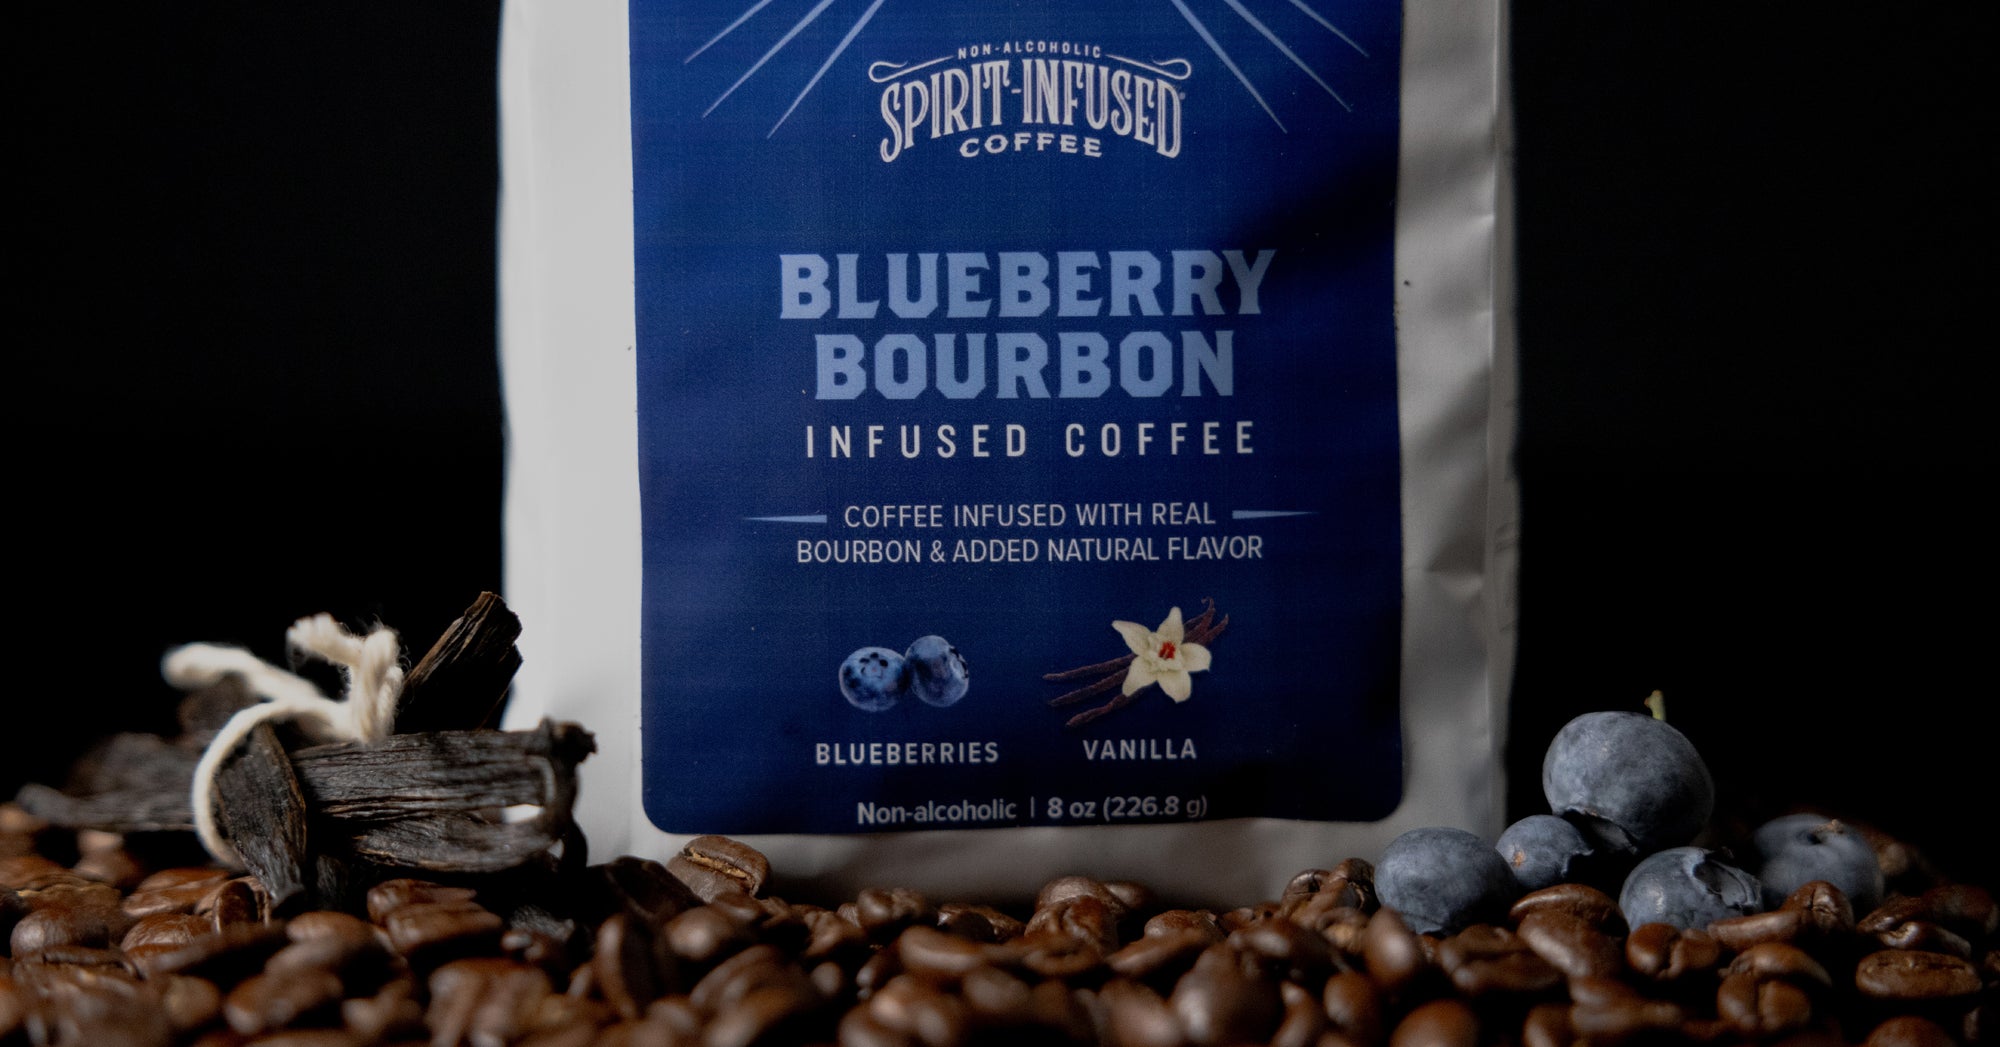 Close up image of Blueberry Bourbon Infused Coffee.